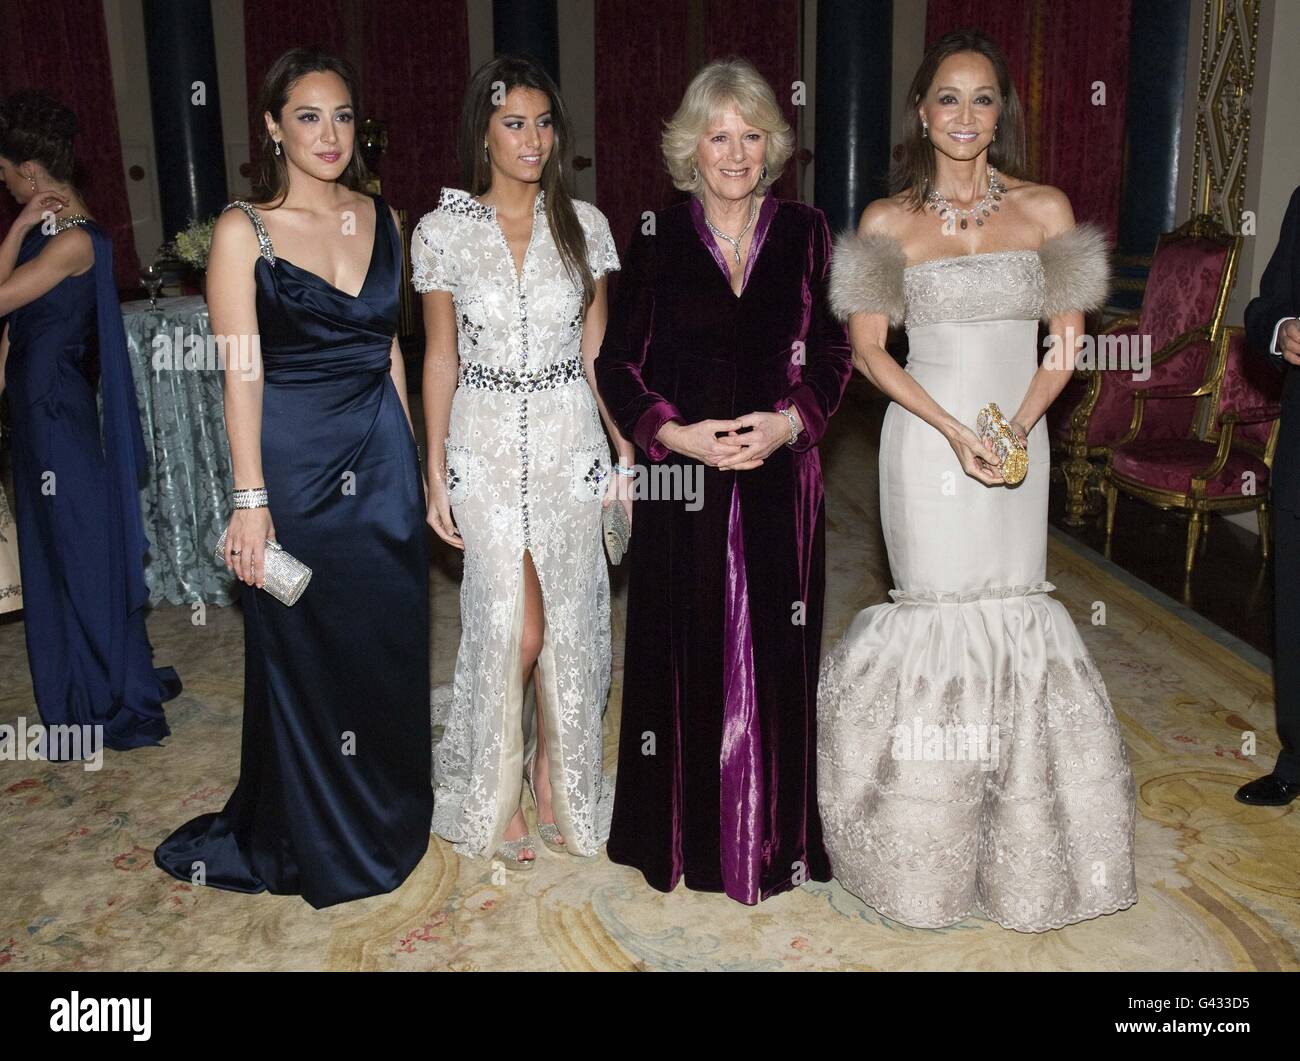 The Duchess of Cornwall with Isabel Preysler and her daughters (names not known) as they attended a gala dinner and theatrical performance for supporters of the Prince's Foundation for Children and the Arts at Buckingham Palace, London. Stock Photo